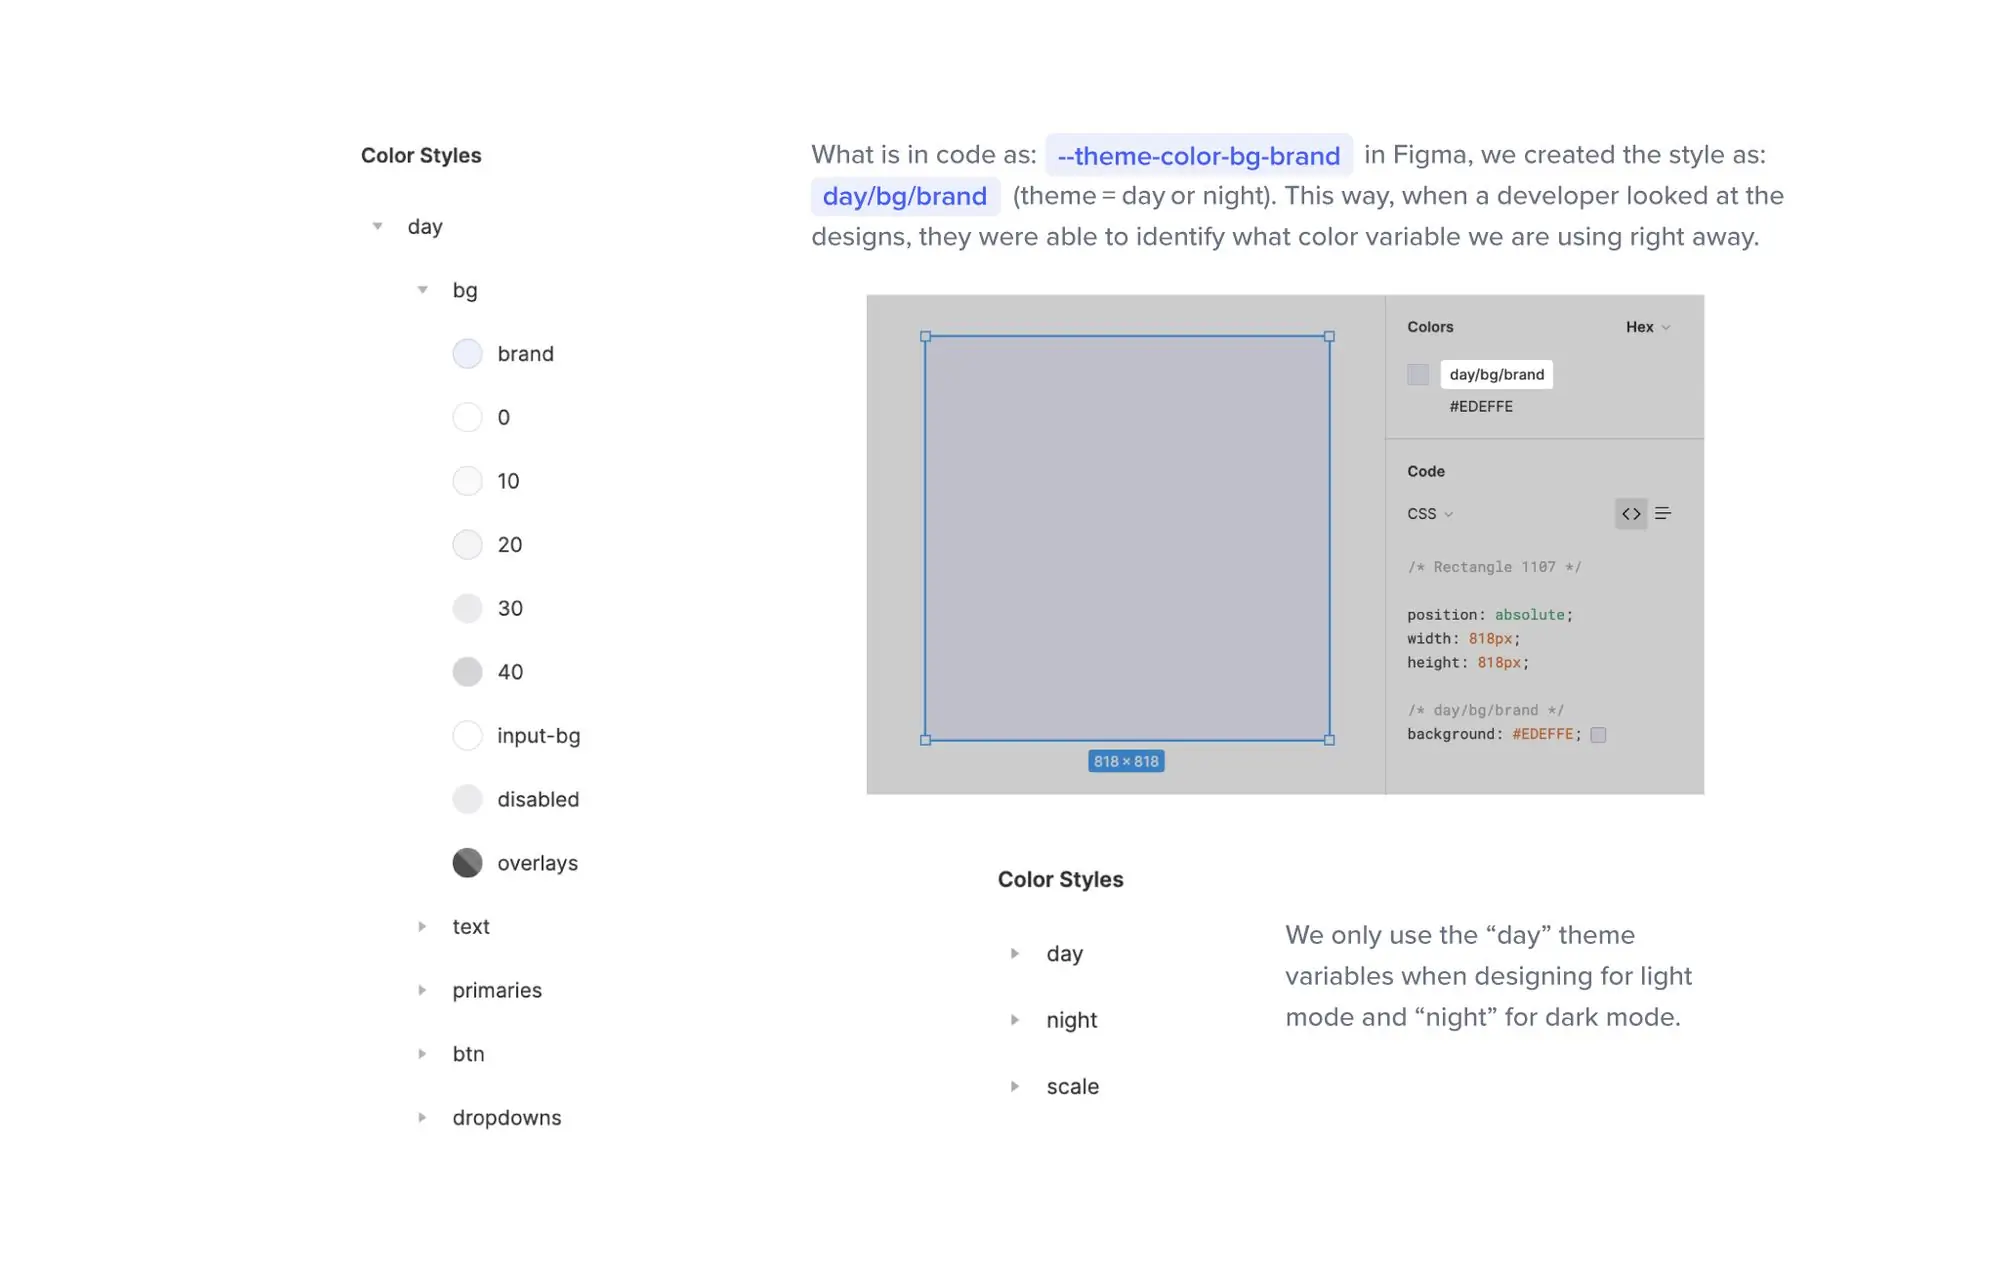 Image showing how the colors and theme variables were transferred to Figma